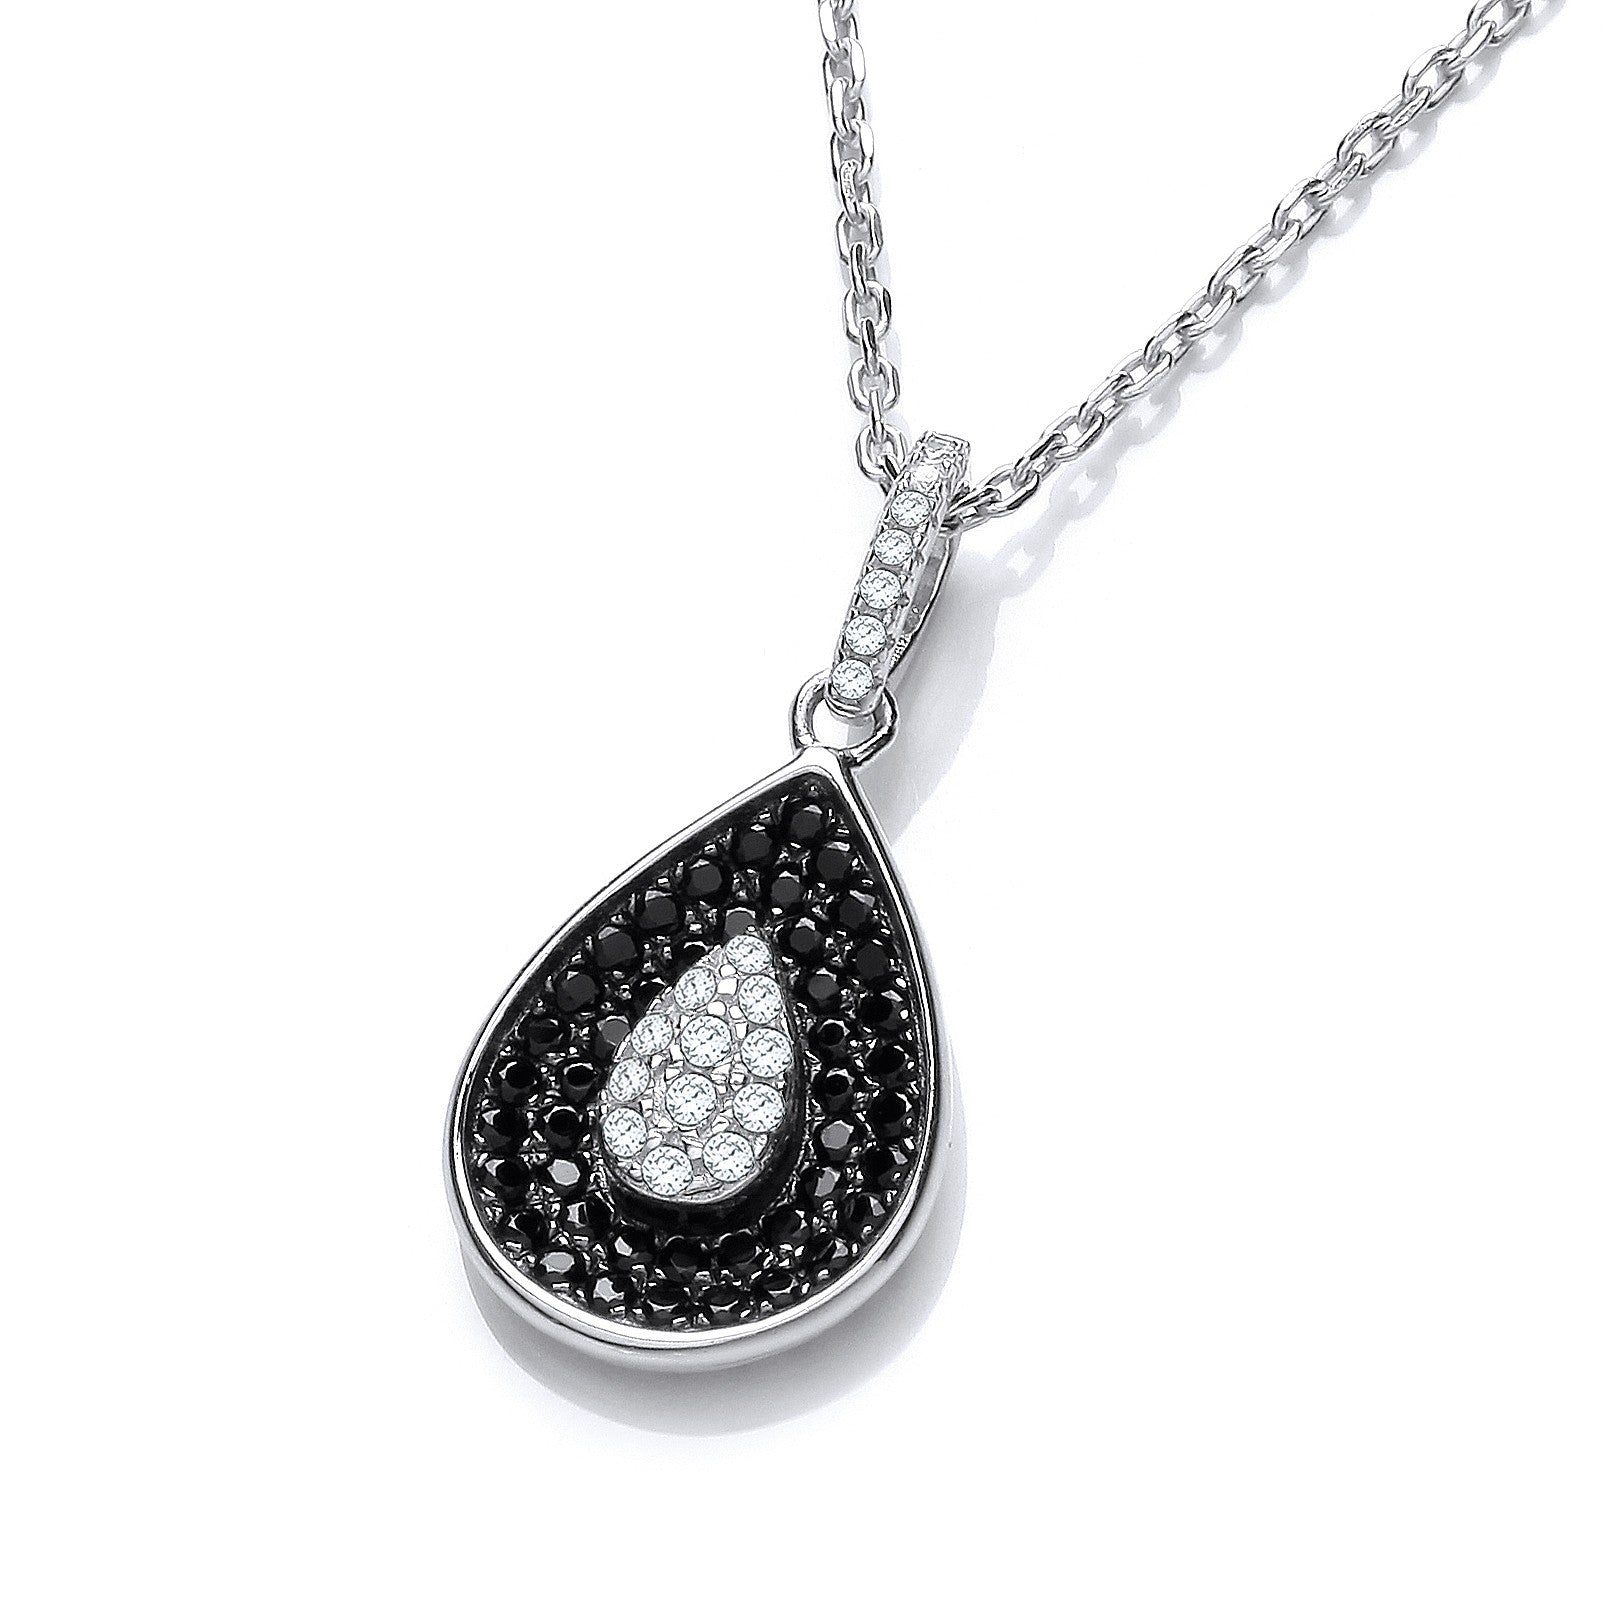 Micro Pave' Black & Clear Cubic Zirconia Teardrop Pendant with 18" Chain